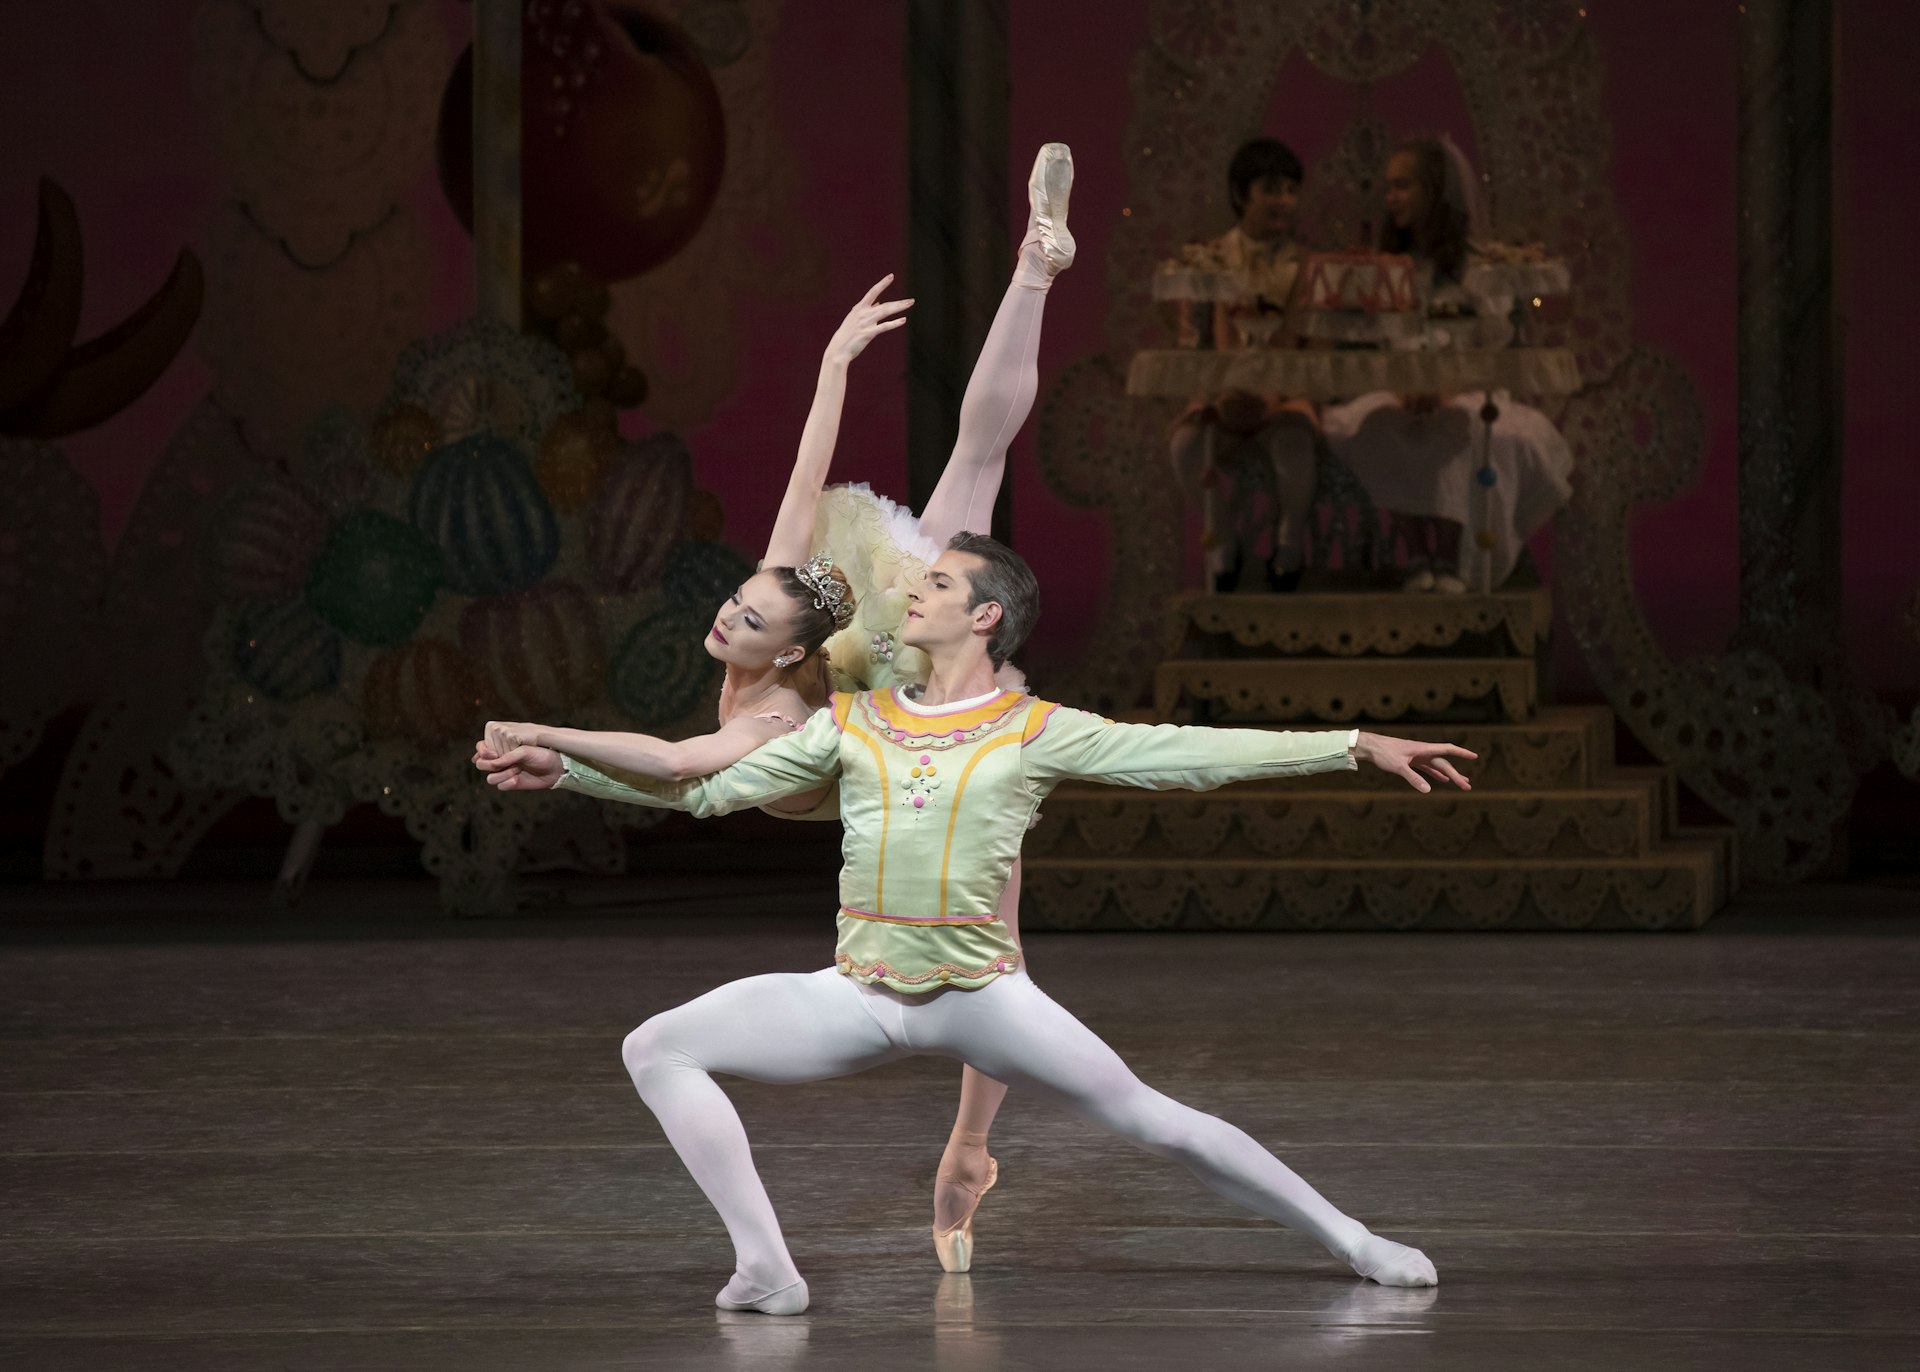 A male and female dancer performing a pas de deux during the NYCB's Nutcracker